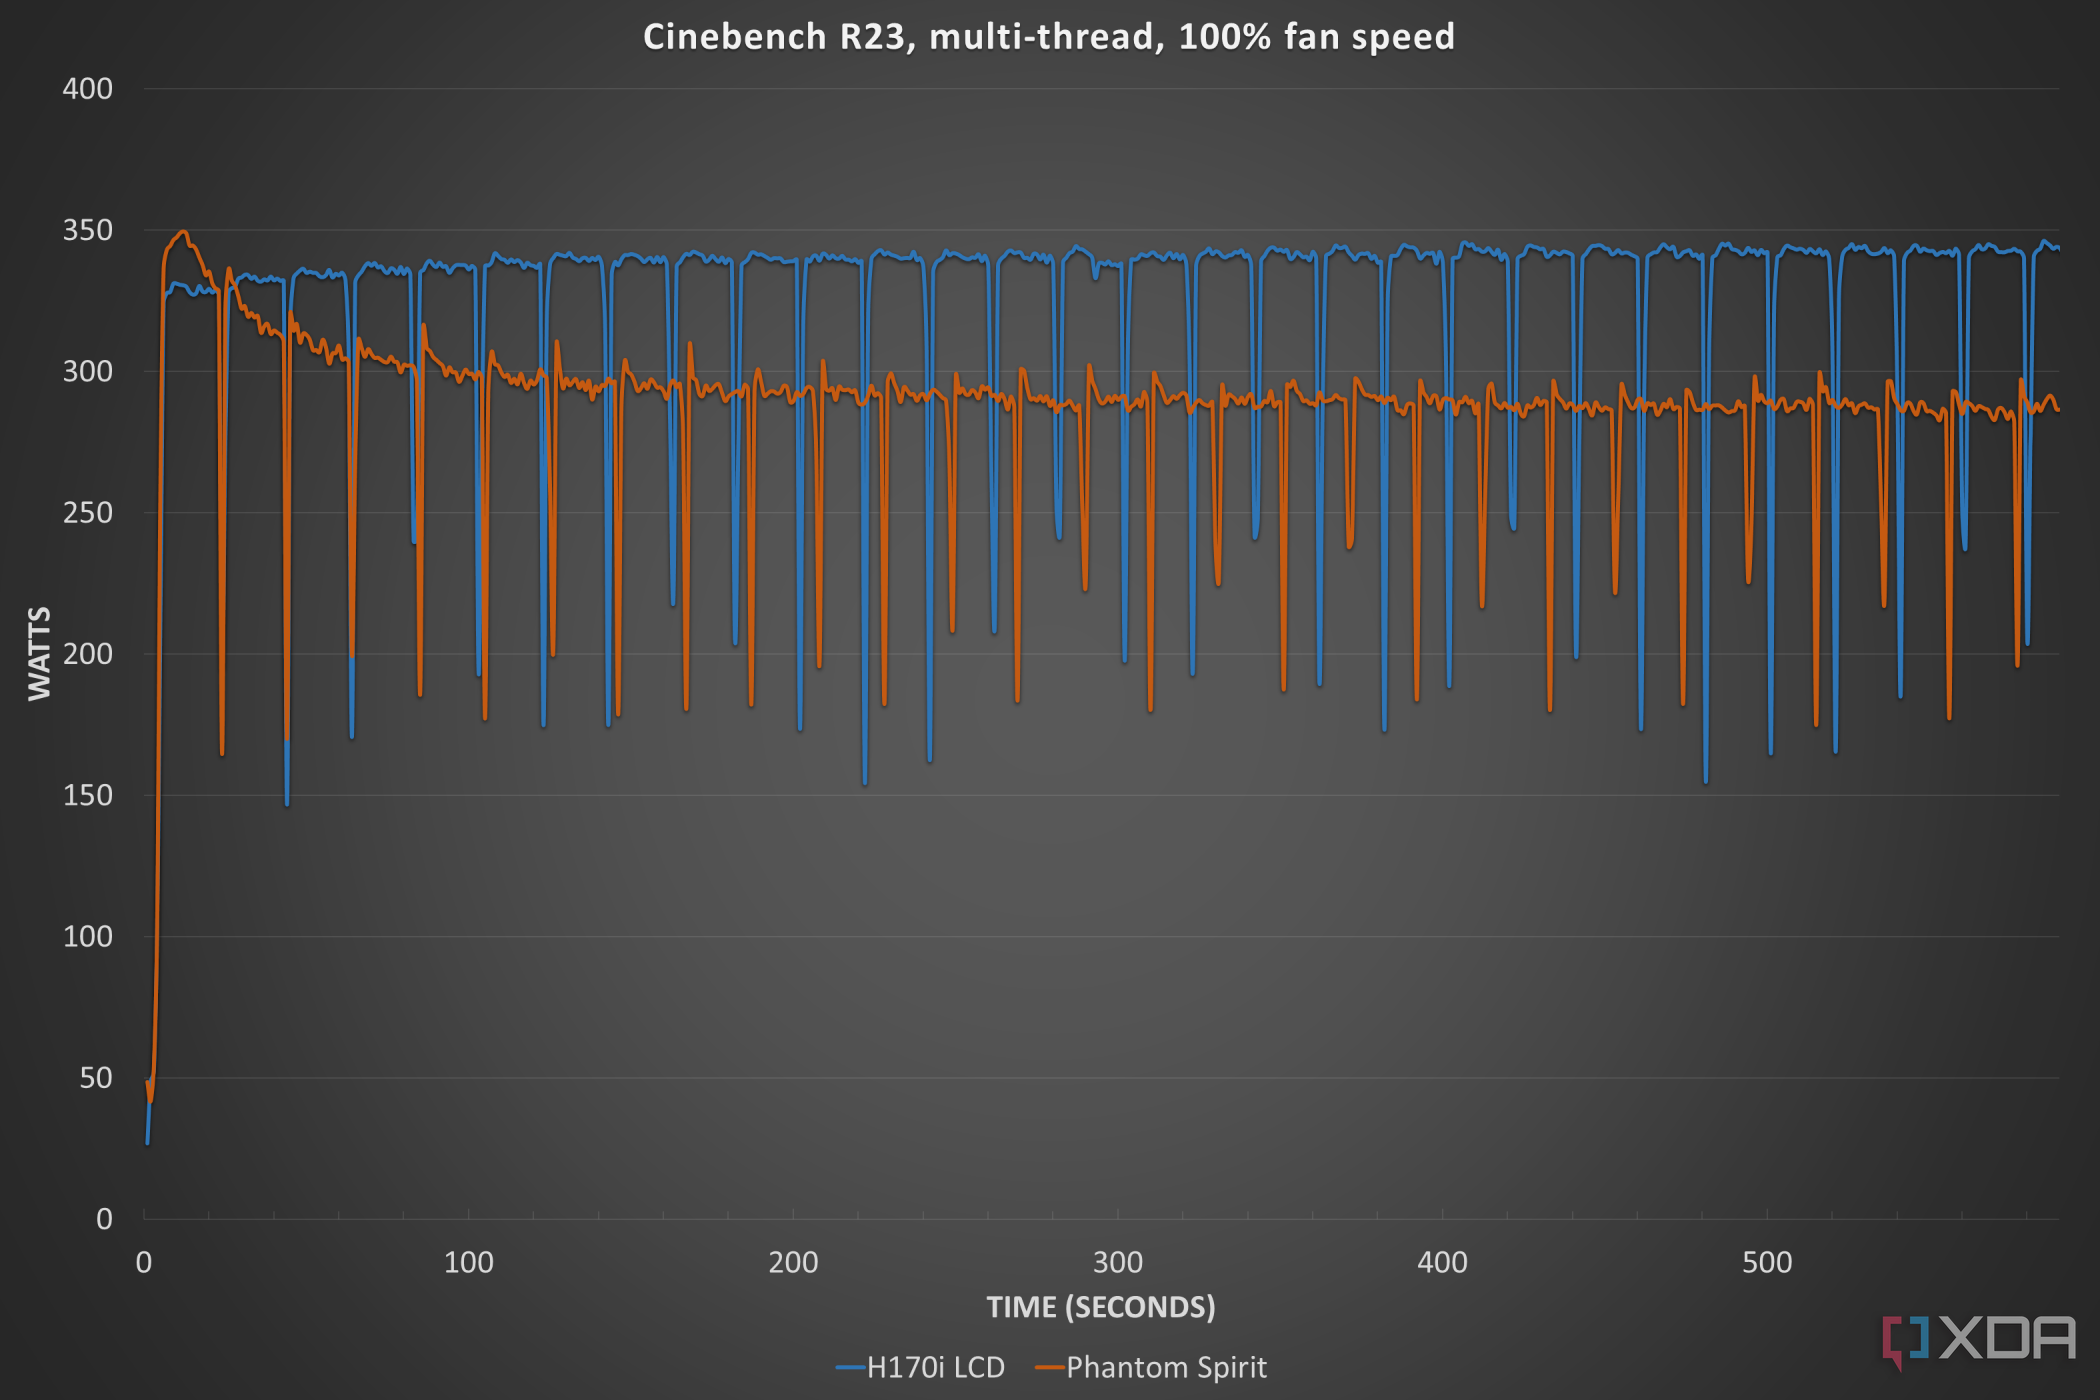 Corsair iCUE Link H170i LCD liquid cooler power consumption in Cinebench R23.